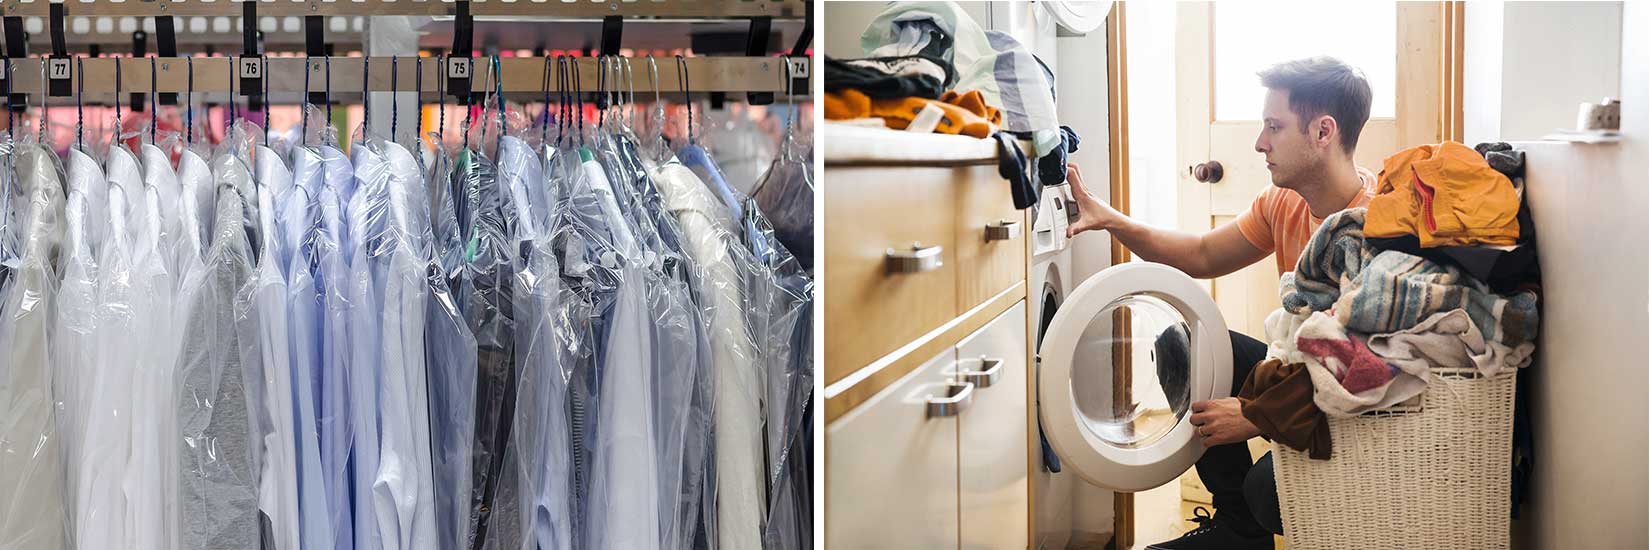 Dry Cleaned vs Washed at Home